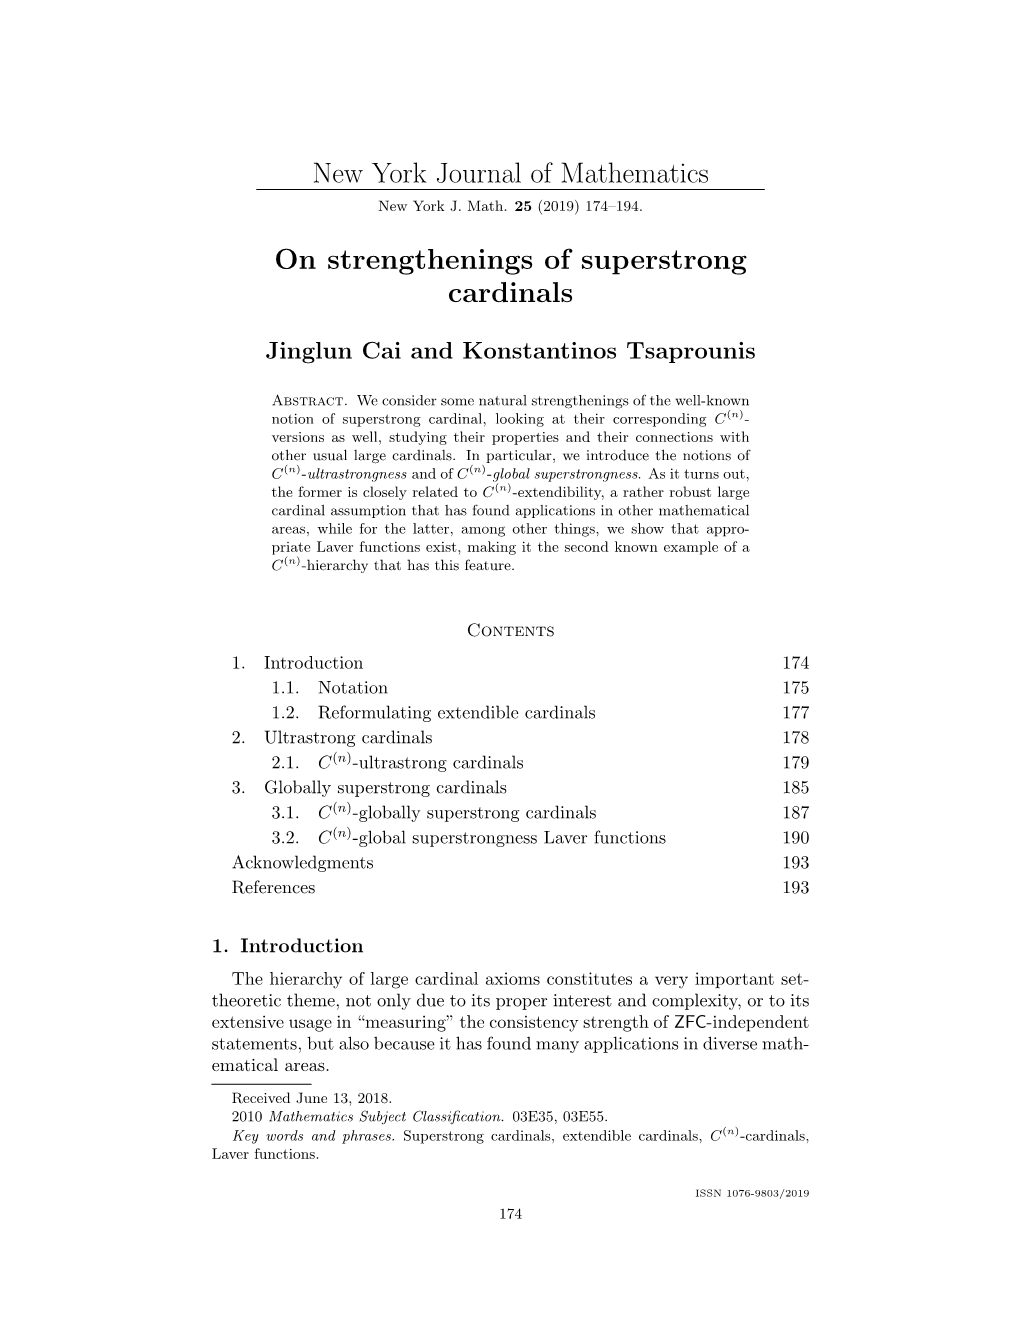 New York Journal of Mathematics on Strengthenings of Superstrong